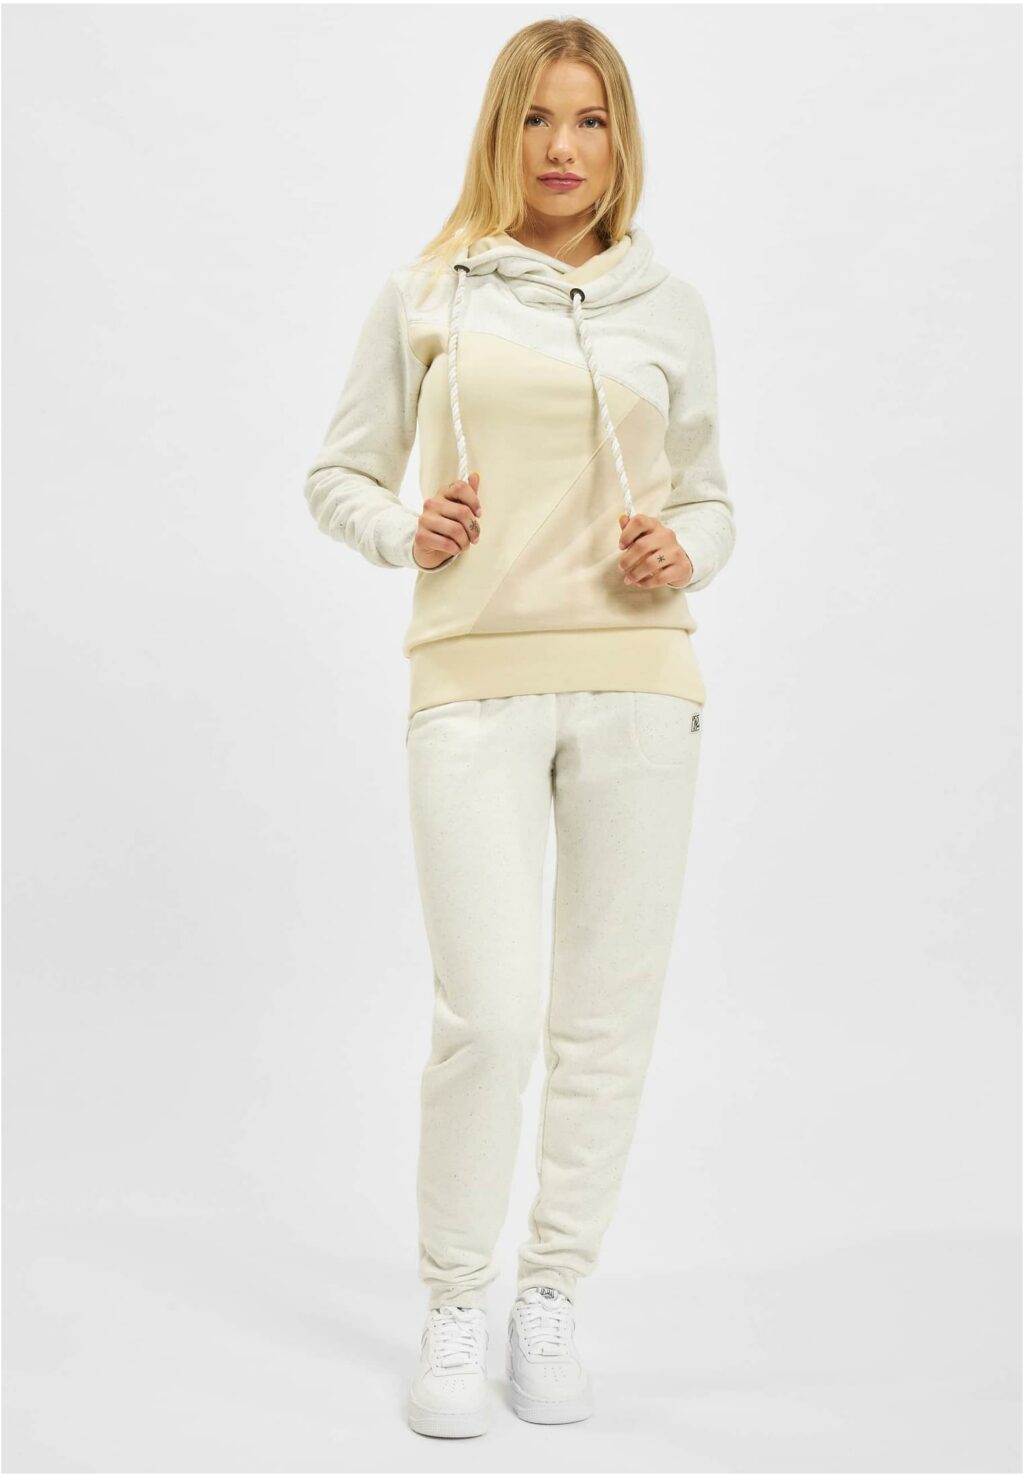 Panamy Hoody offwhite JLHD233